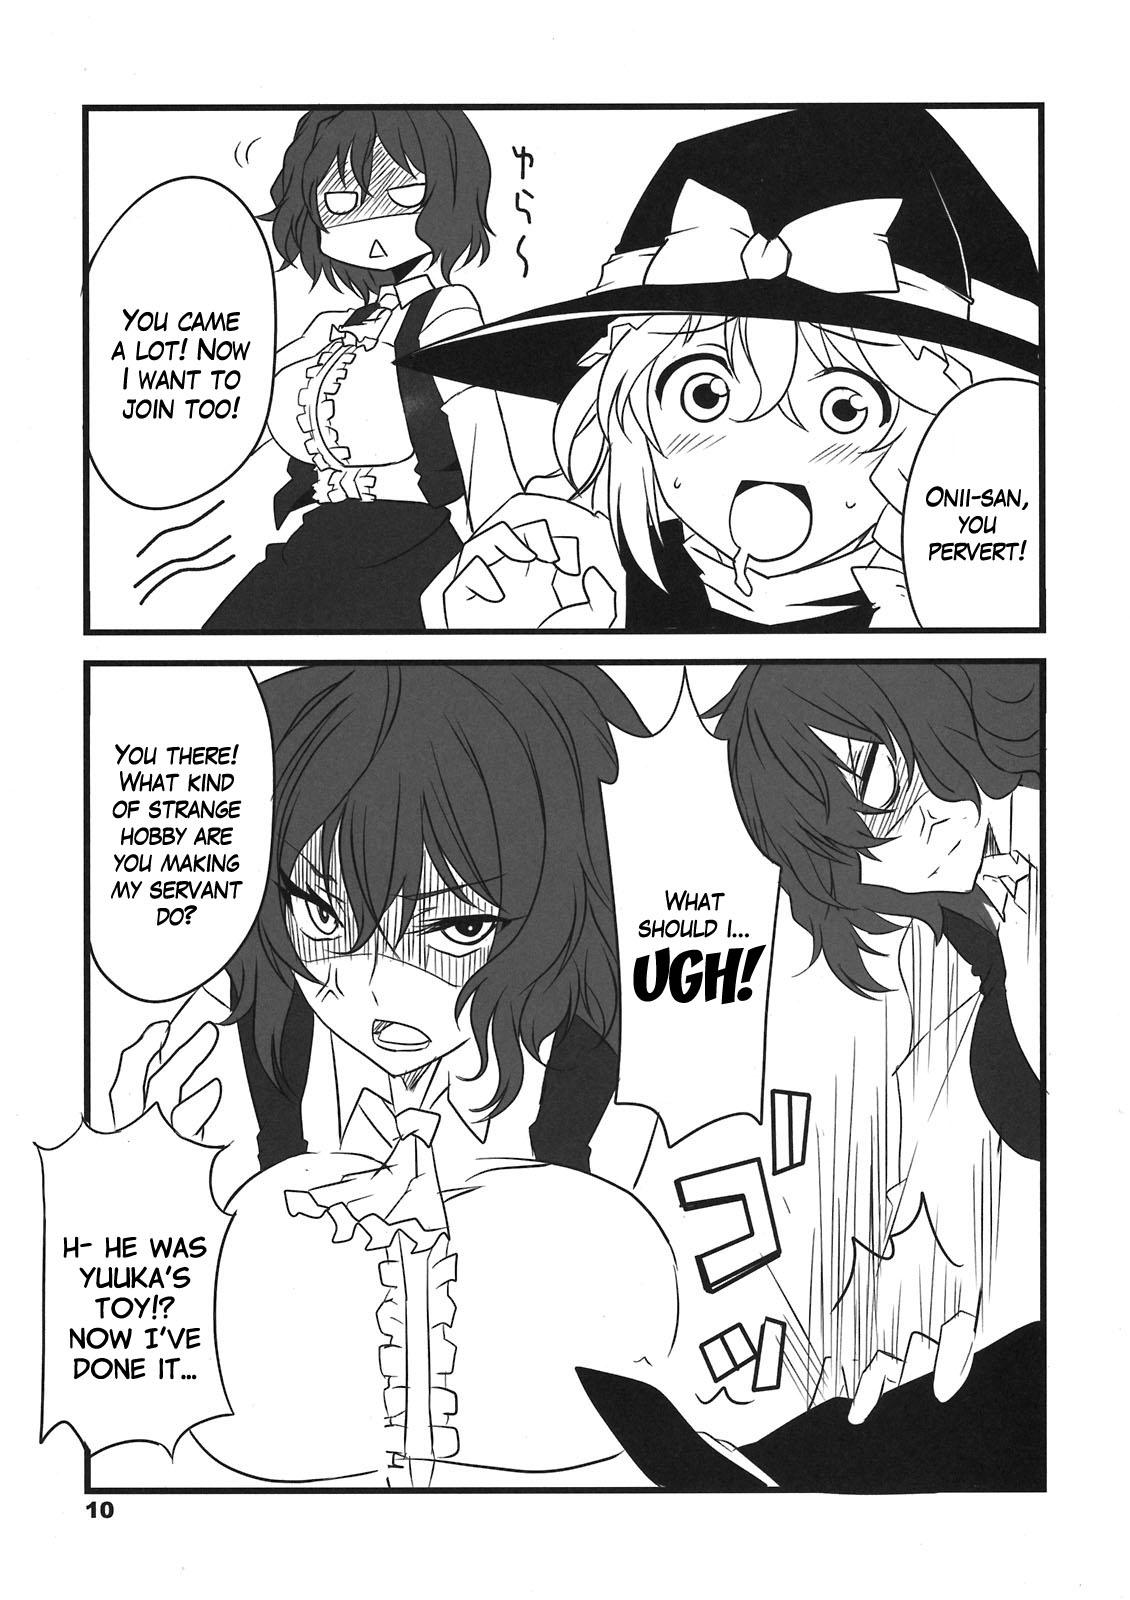 Slapping Tabechauzo? | You Gonna Be Eaten! - Touhou project Party - Page 10